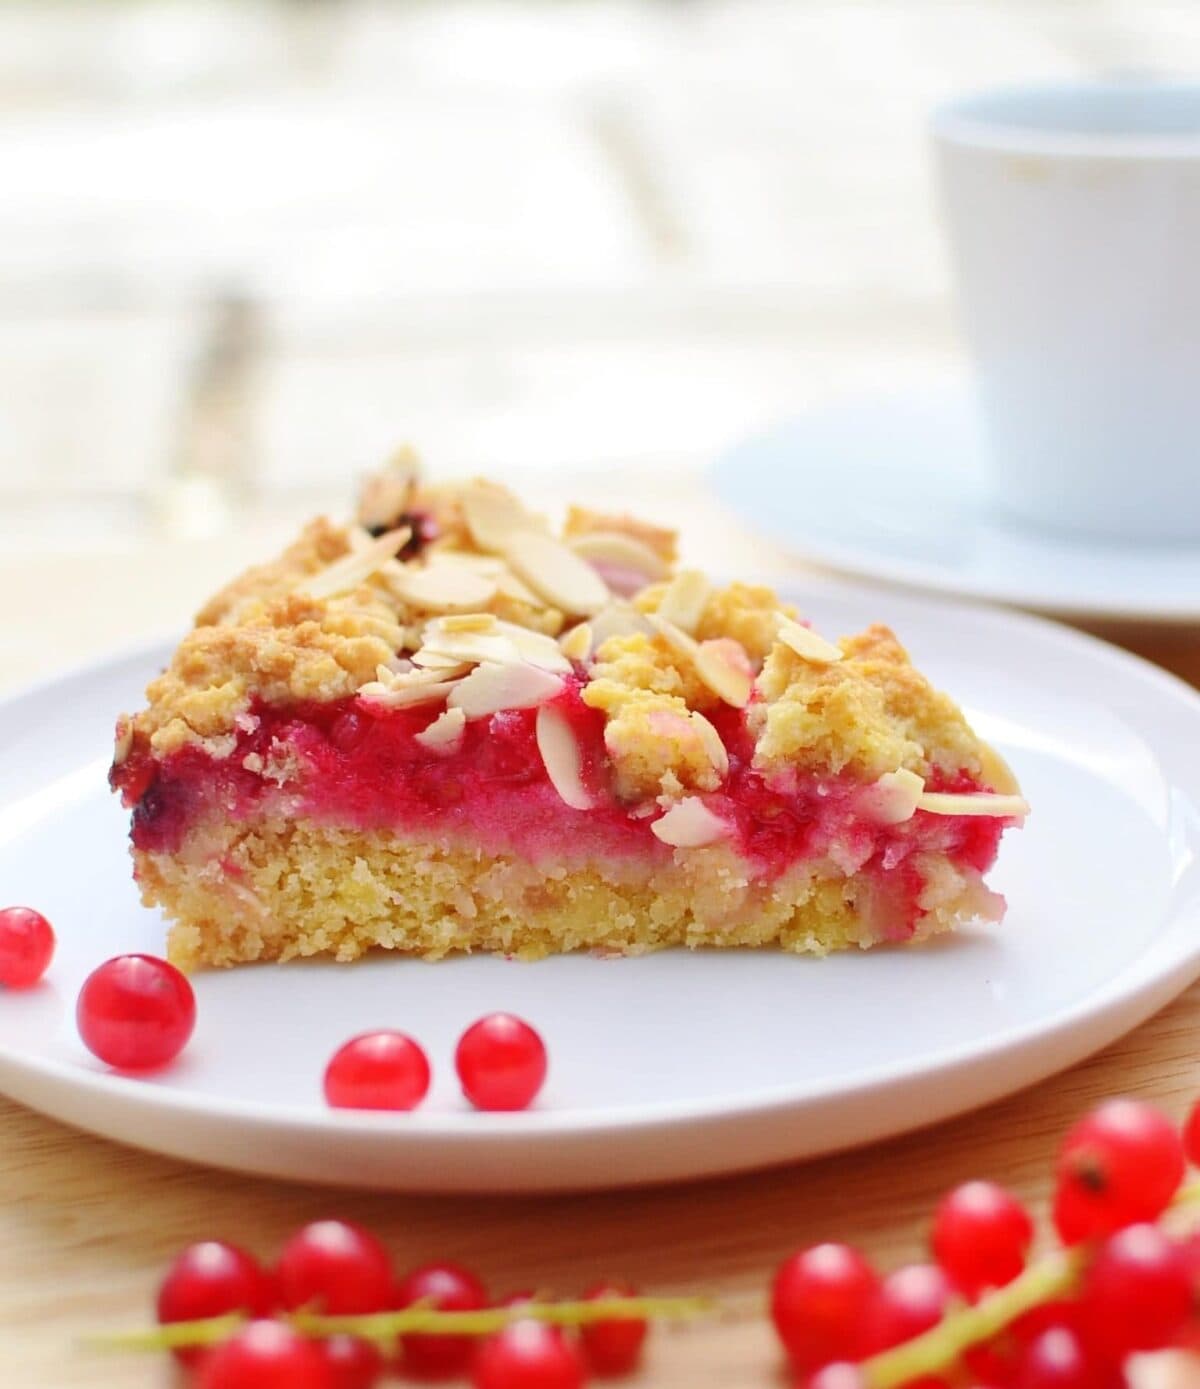 Side view of almond redcurrant cake slice on white plate with redcurrants on wooden surface.